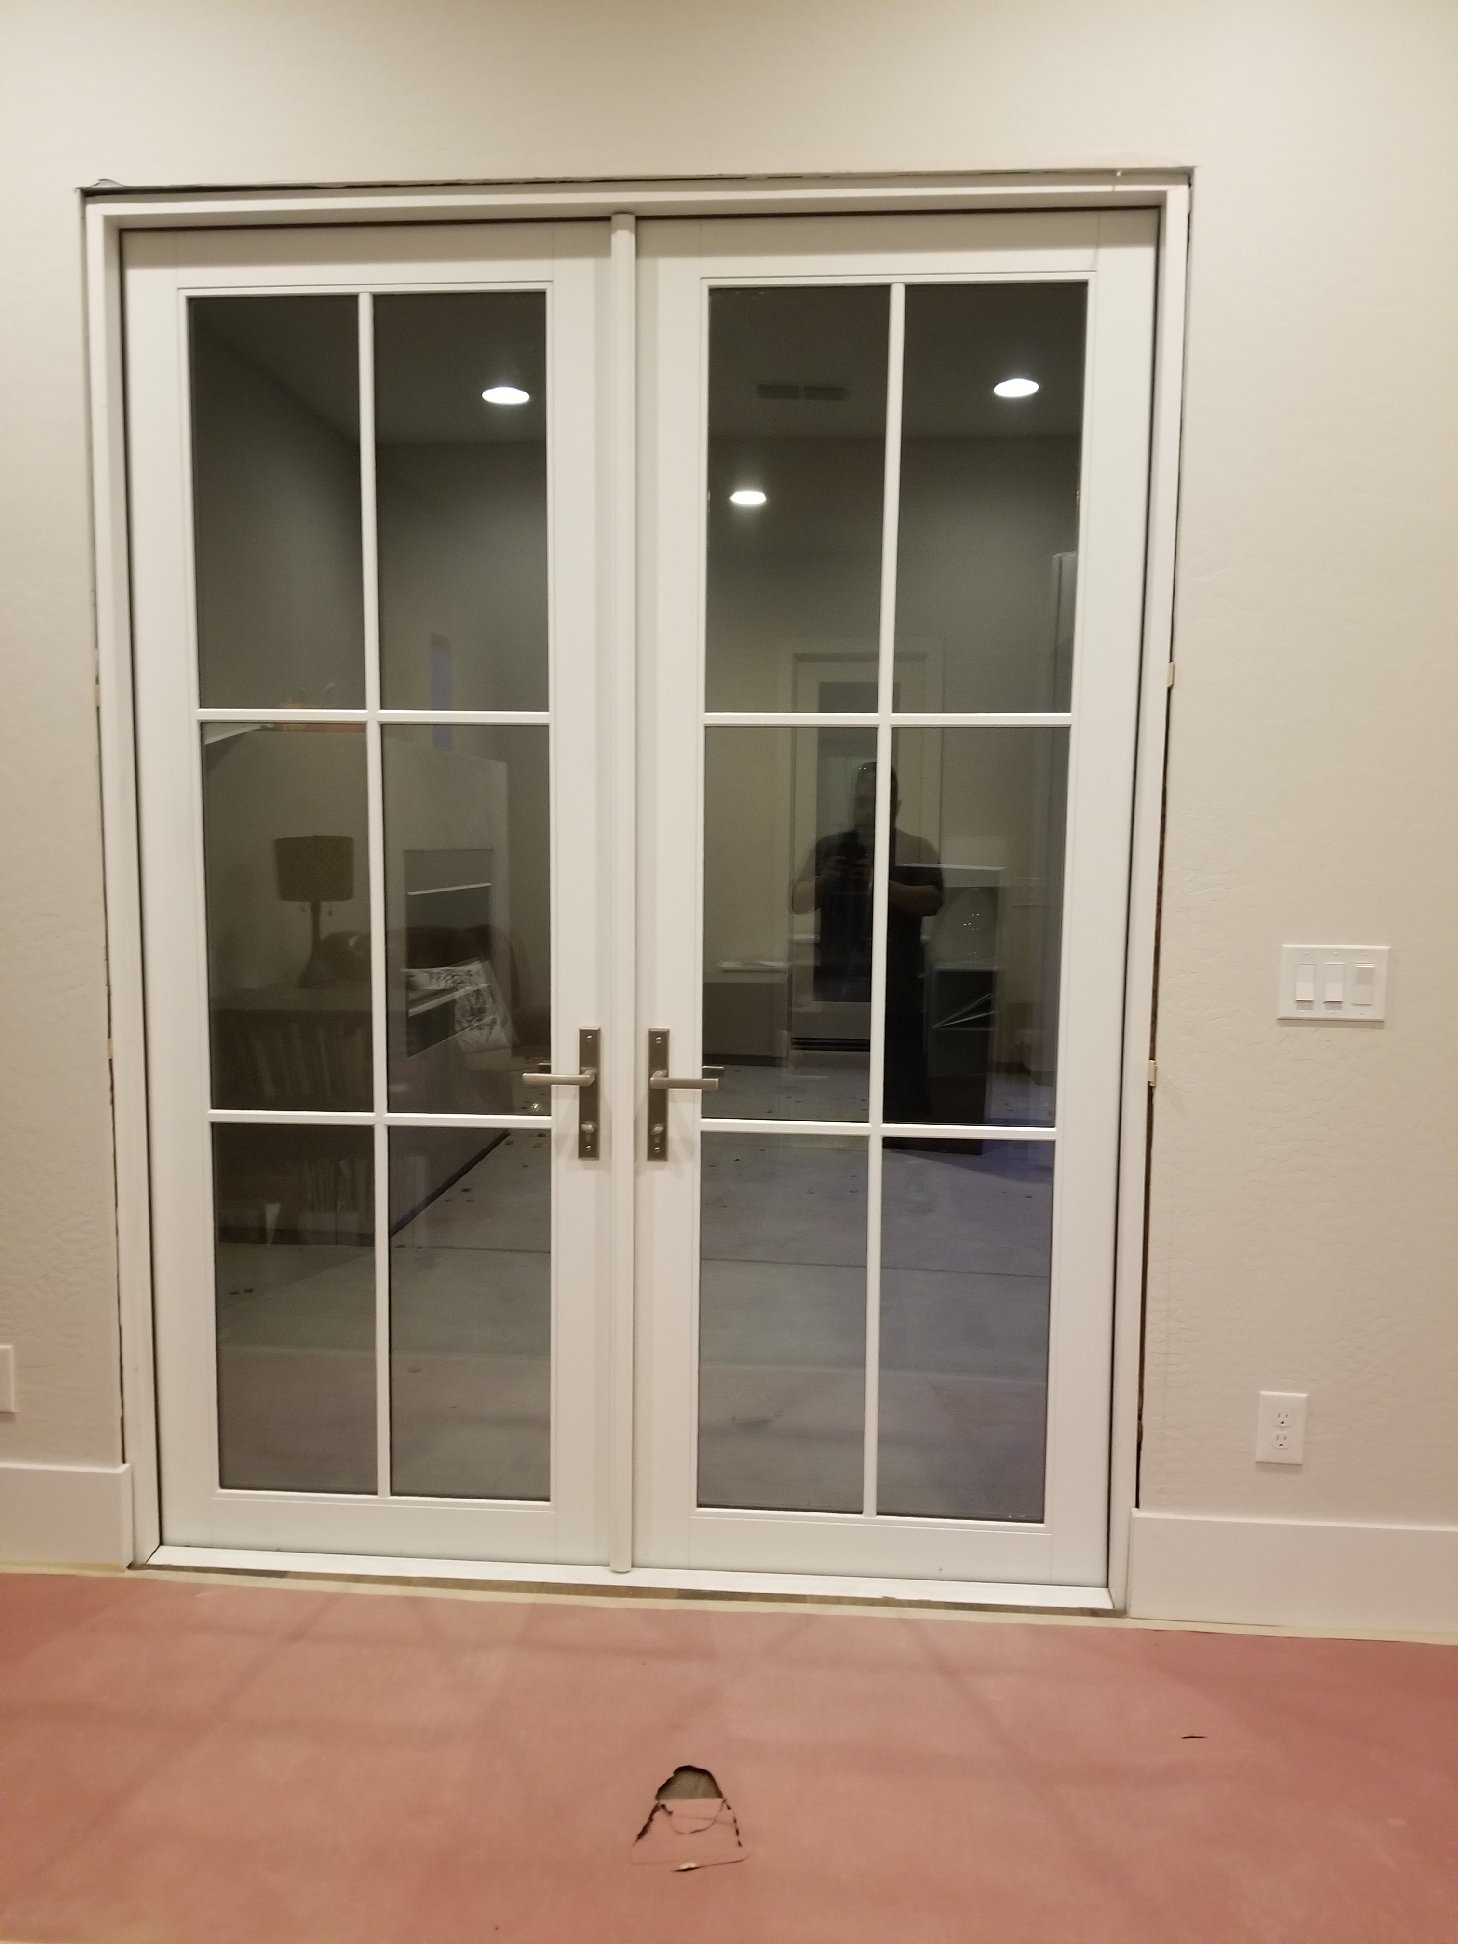 Arizona Window and Door in Scottsdale and Tucson showing back french doors